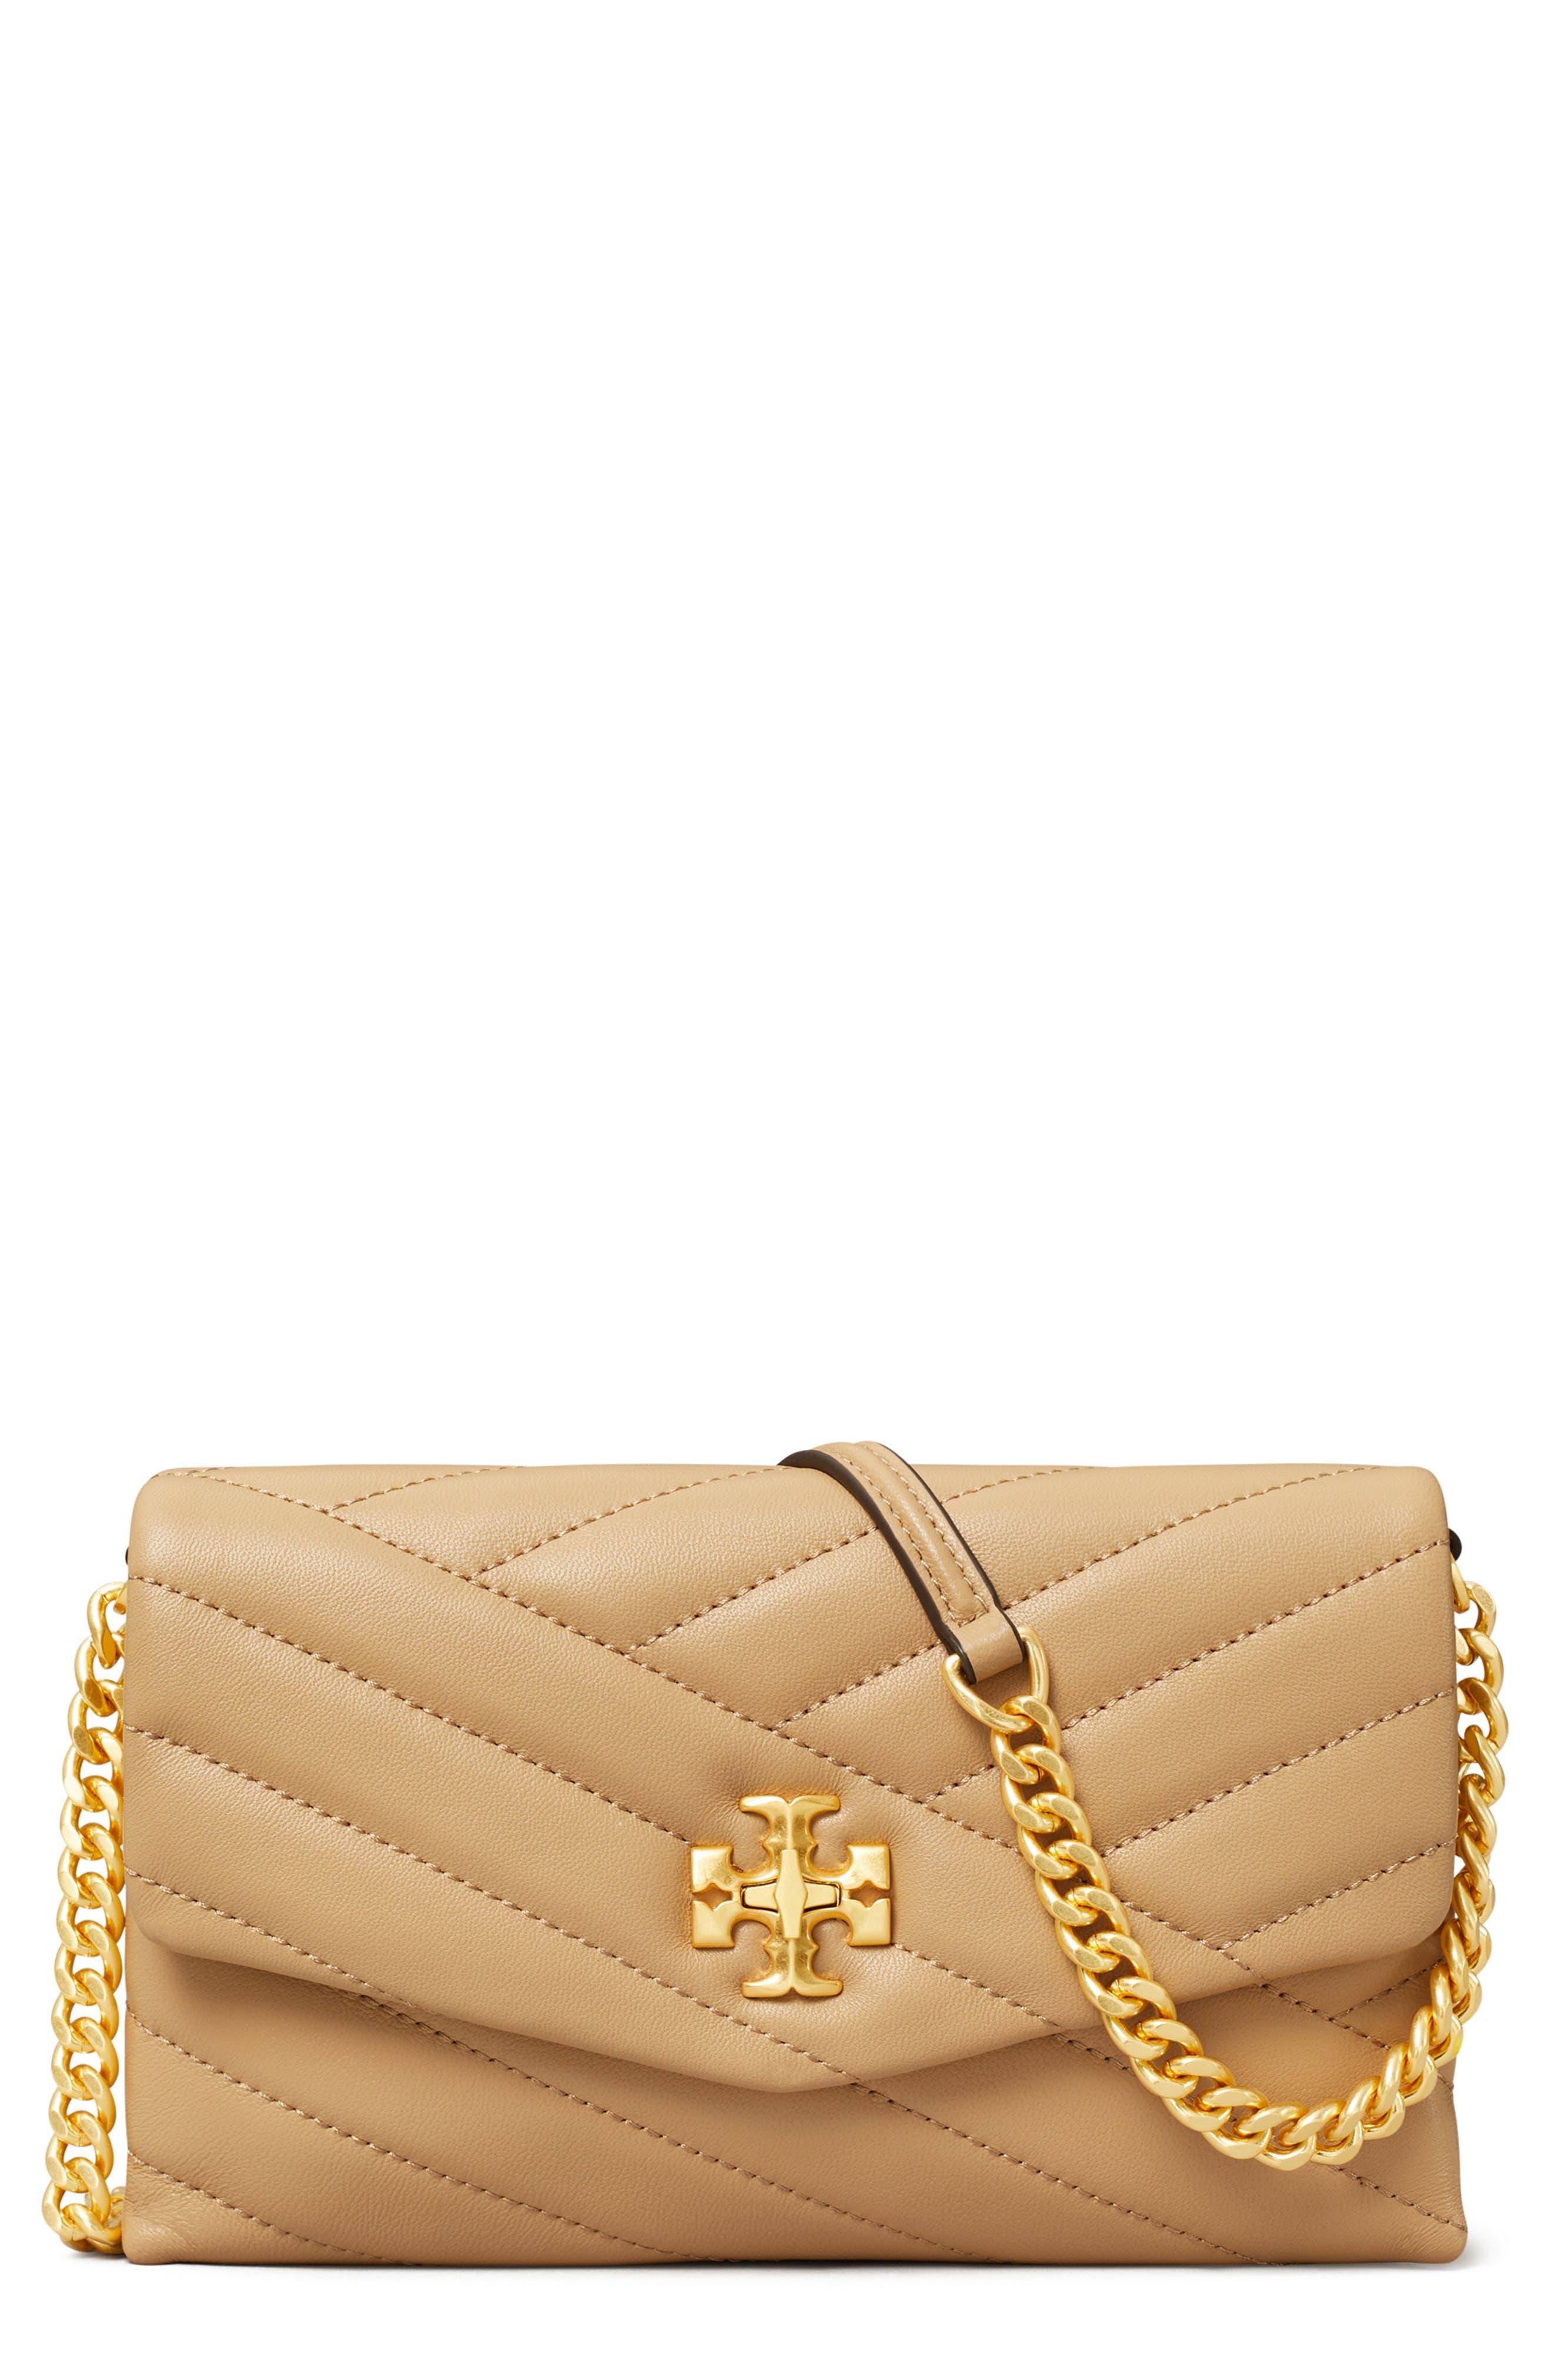 Tory Burch Kira Chevron Quilted Leather Wallet On A Chain in Natural